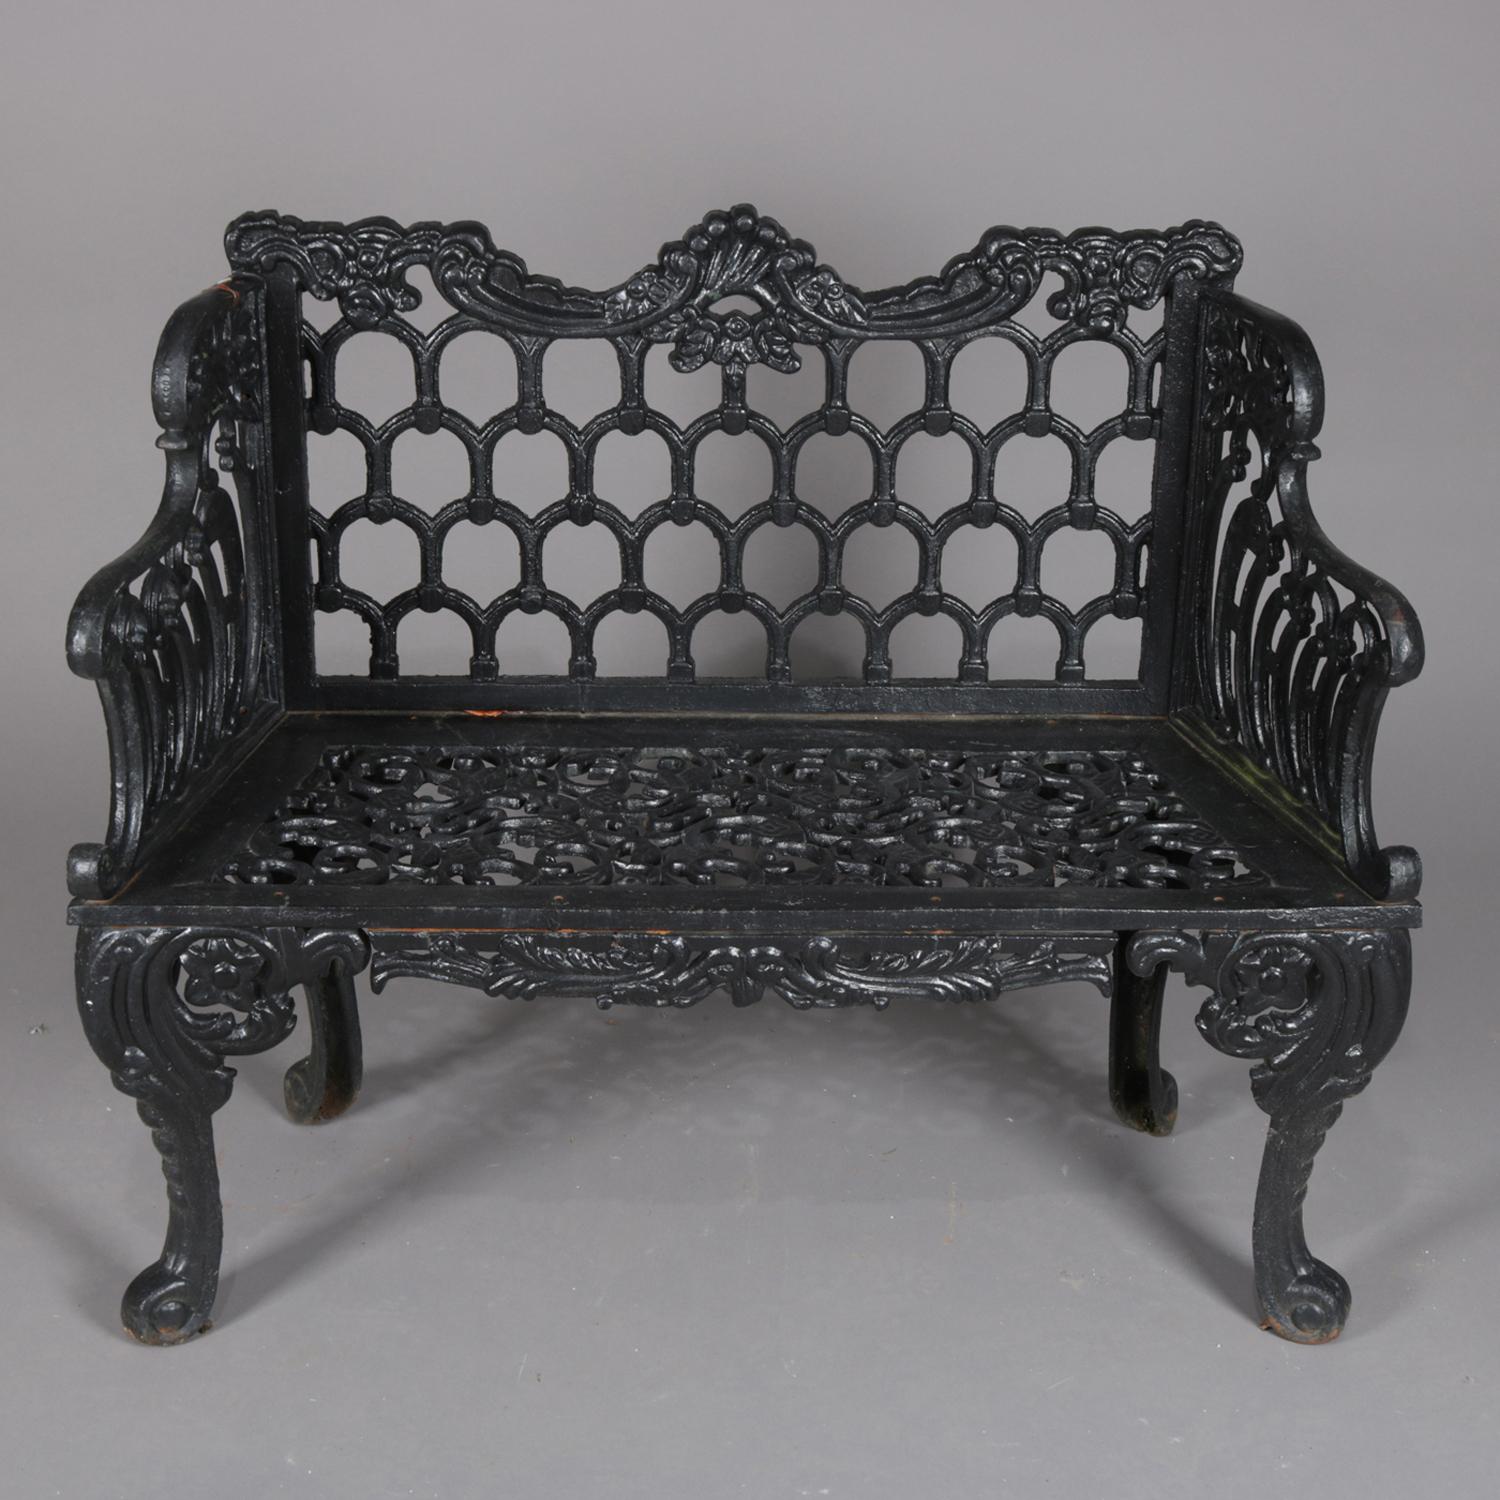 A Rococo Revival painted cast iron 